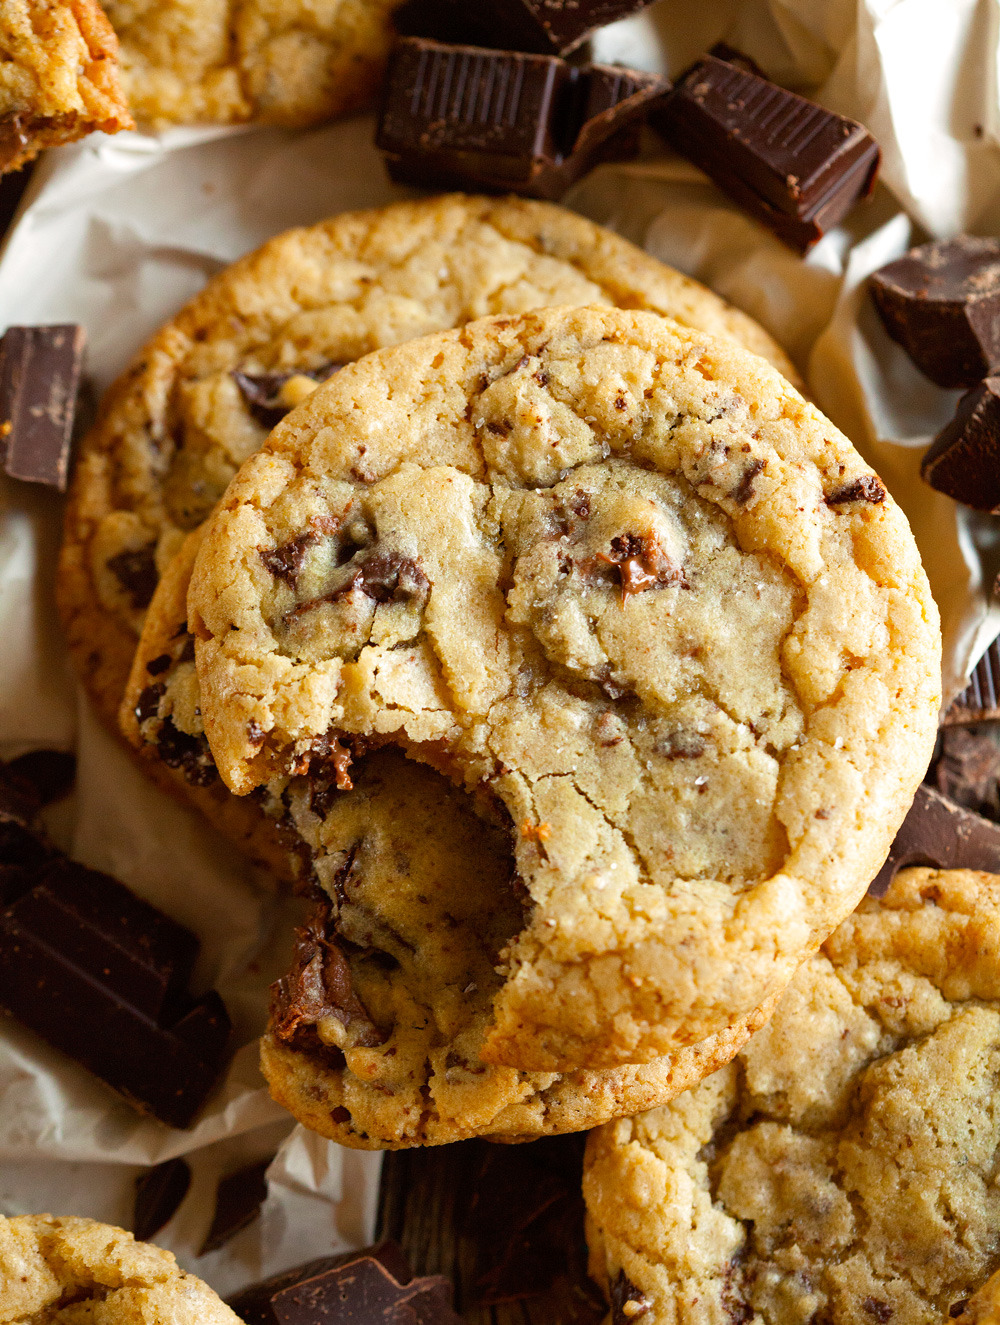 Chocoholic Chocolate Chunk Cookies (by Deliciously Yum)